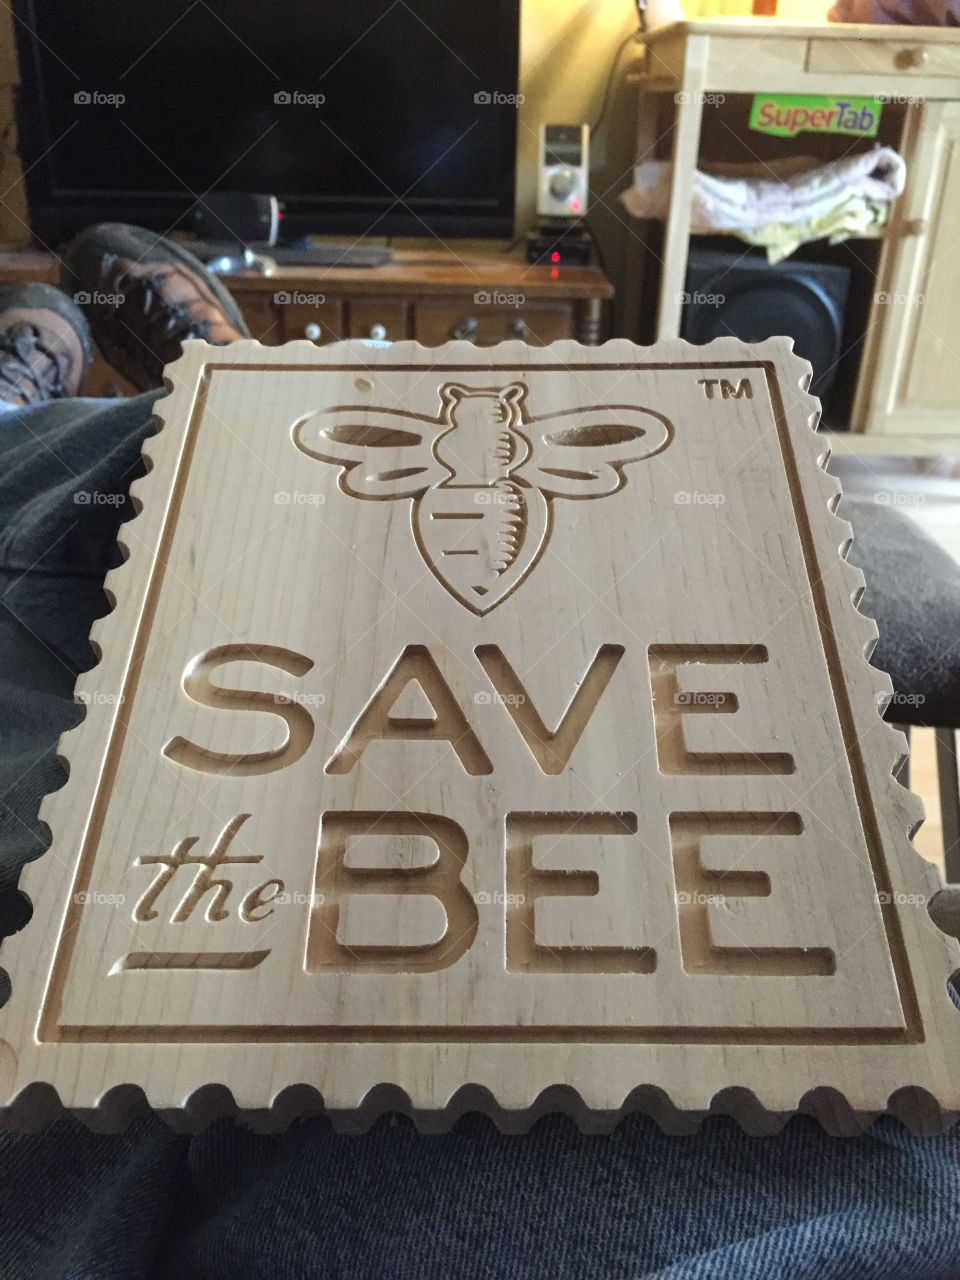 Save the Bee!

Save the Bee is among others a GloryBee campaign to bring awareness of Bee health and related issues. 
